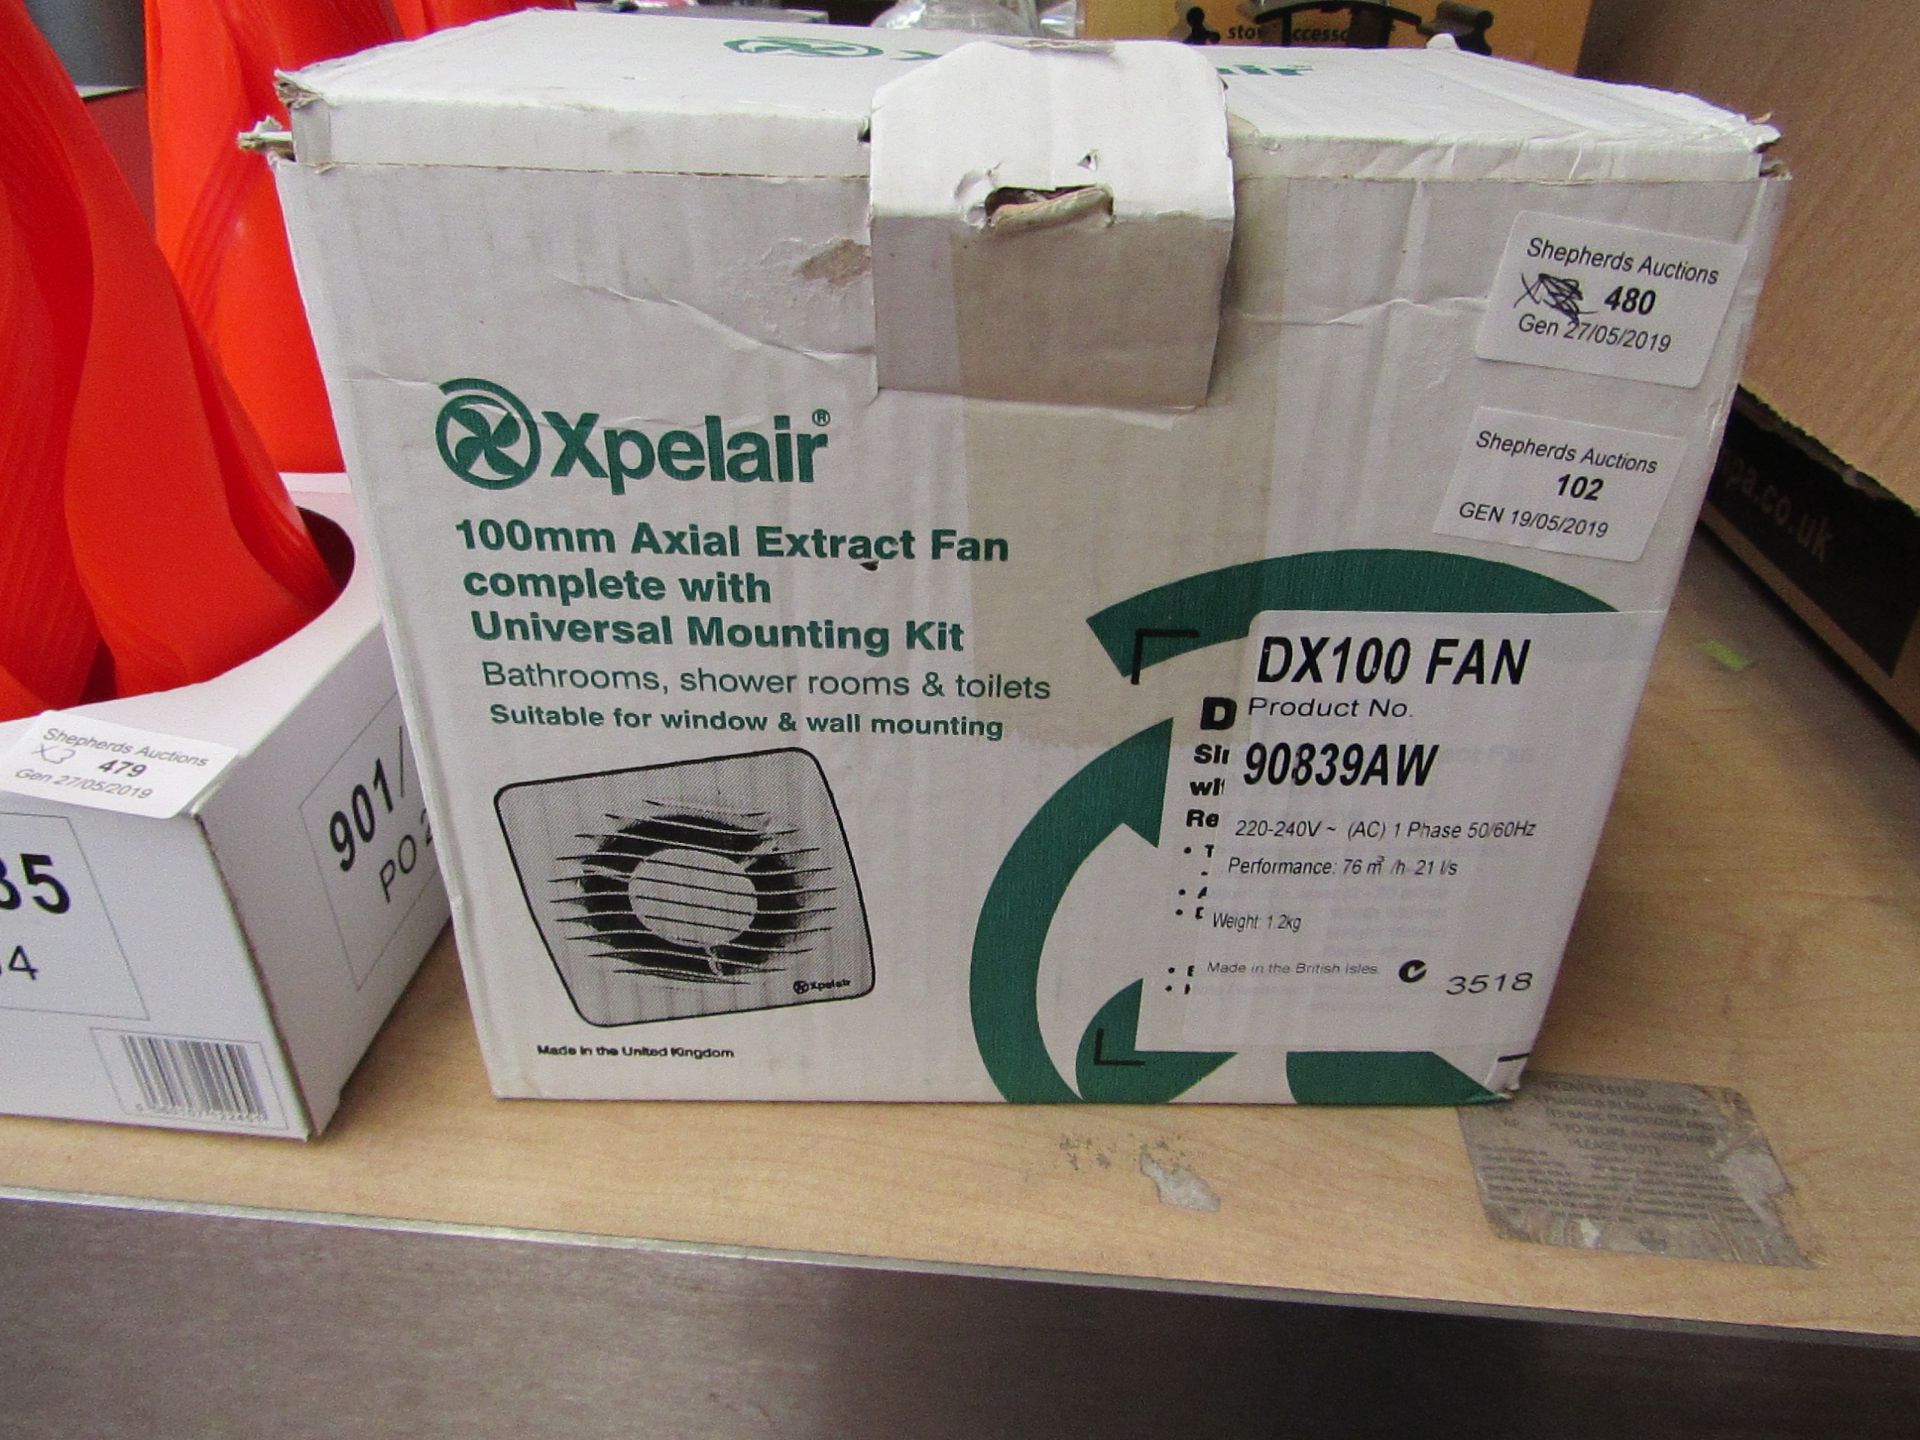 Xpeliar 100mm Axial Extract fan boxed